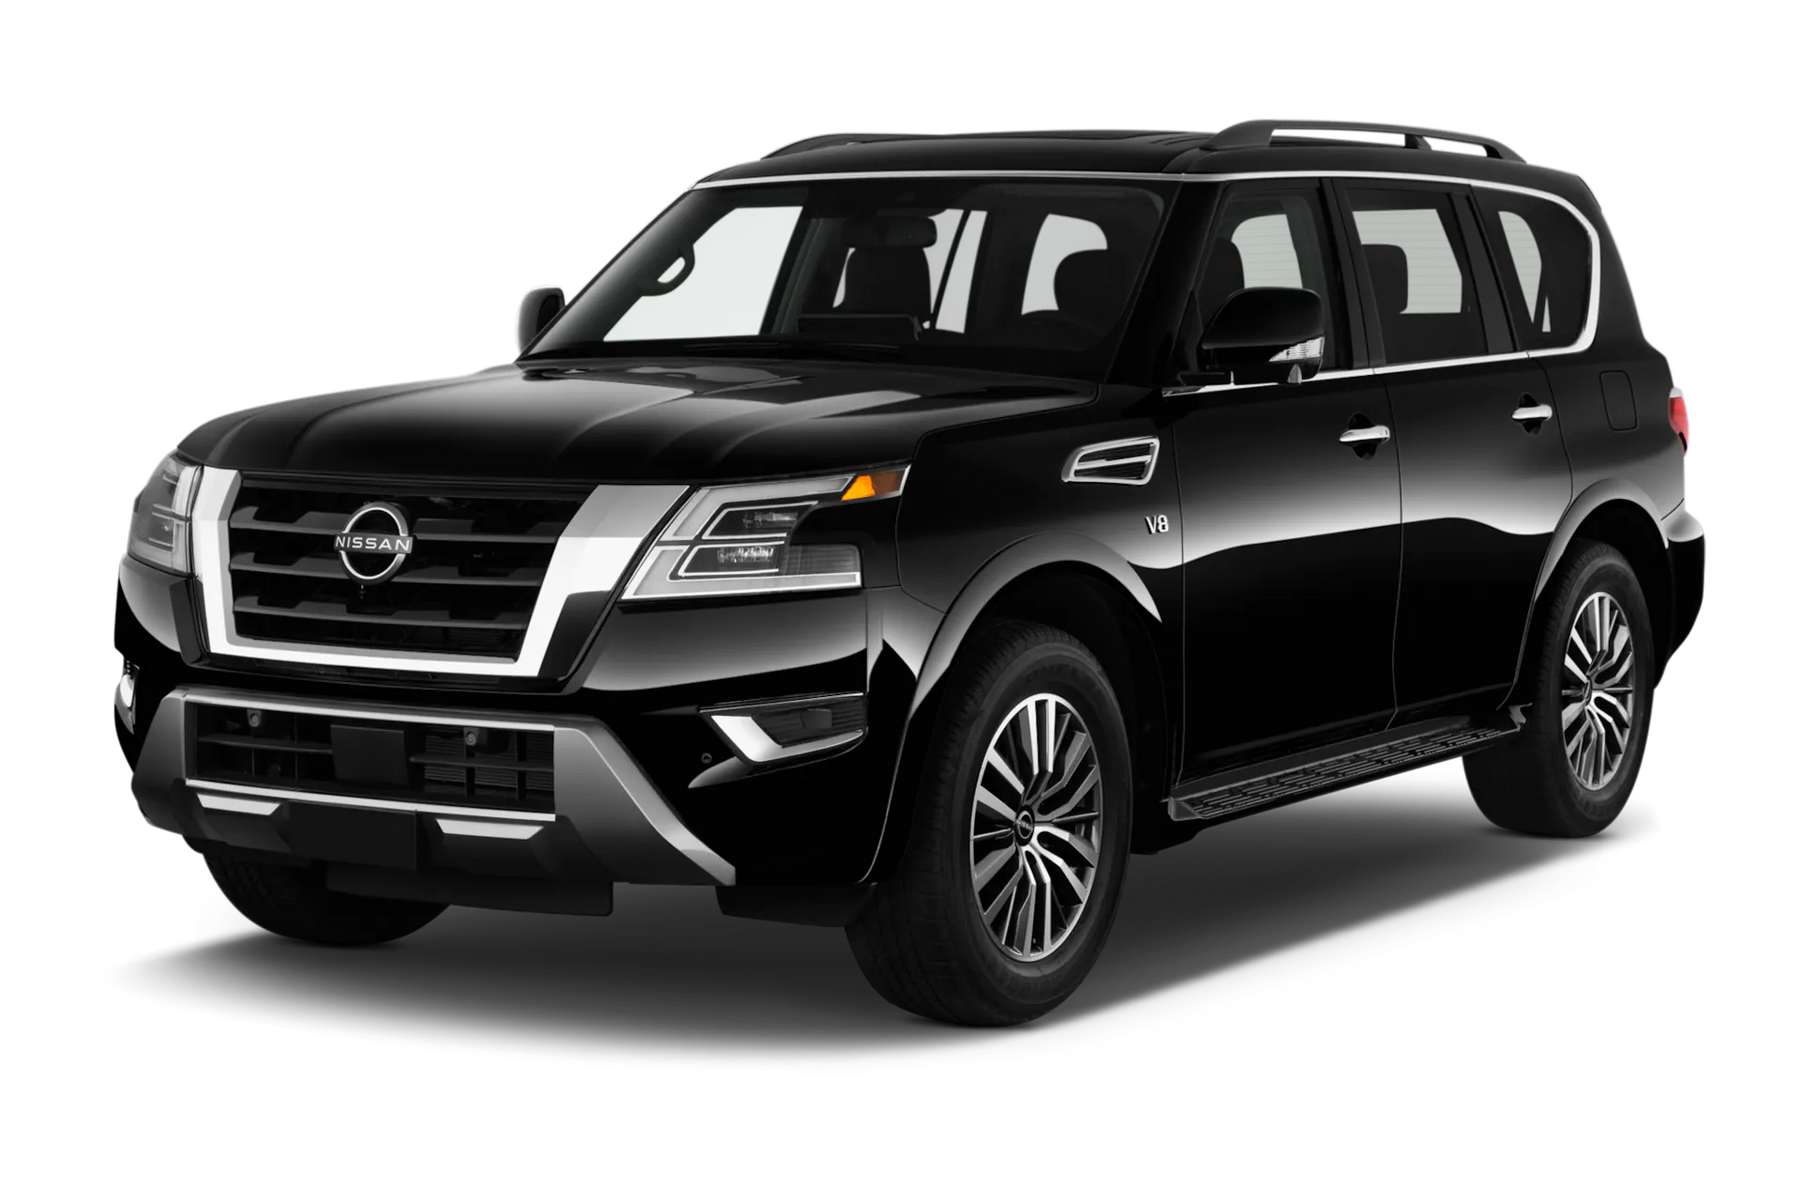 Nissan Armada Rear Suspension Problems and Solutions